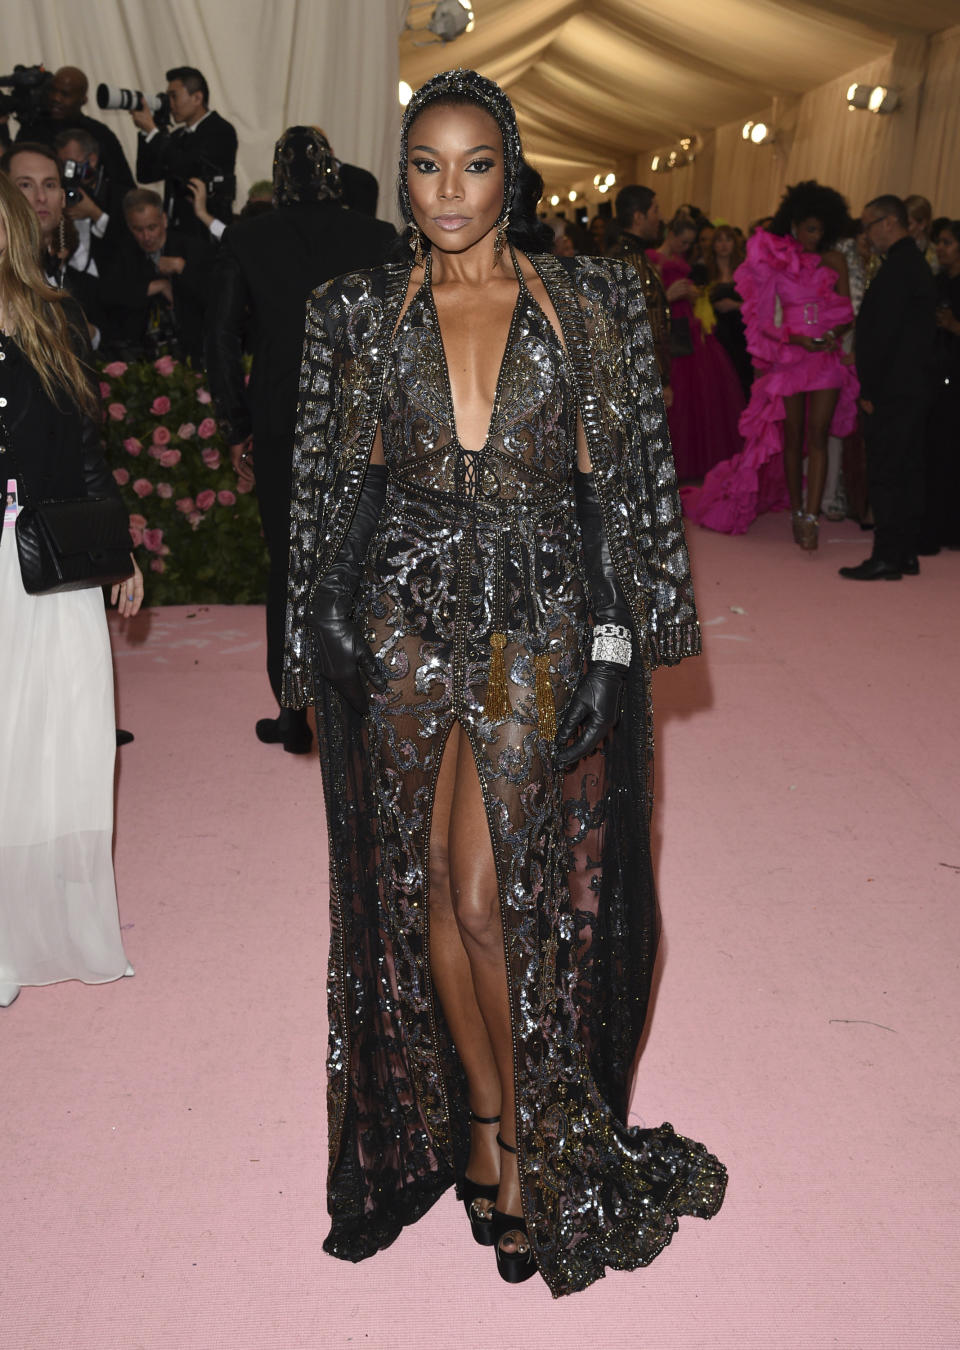 Gabrielle Union attends The Metropolitan Museum of Art's Costume Institute benefit gala celebrating the opening of the "Camp: Notes on Fashion" exhibition on Monday, May 6, 2019, in New York. (Photo by Evan Agostini/Invision/AP)